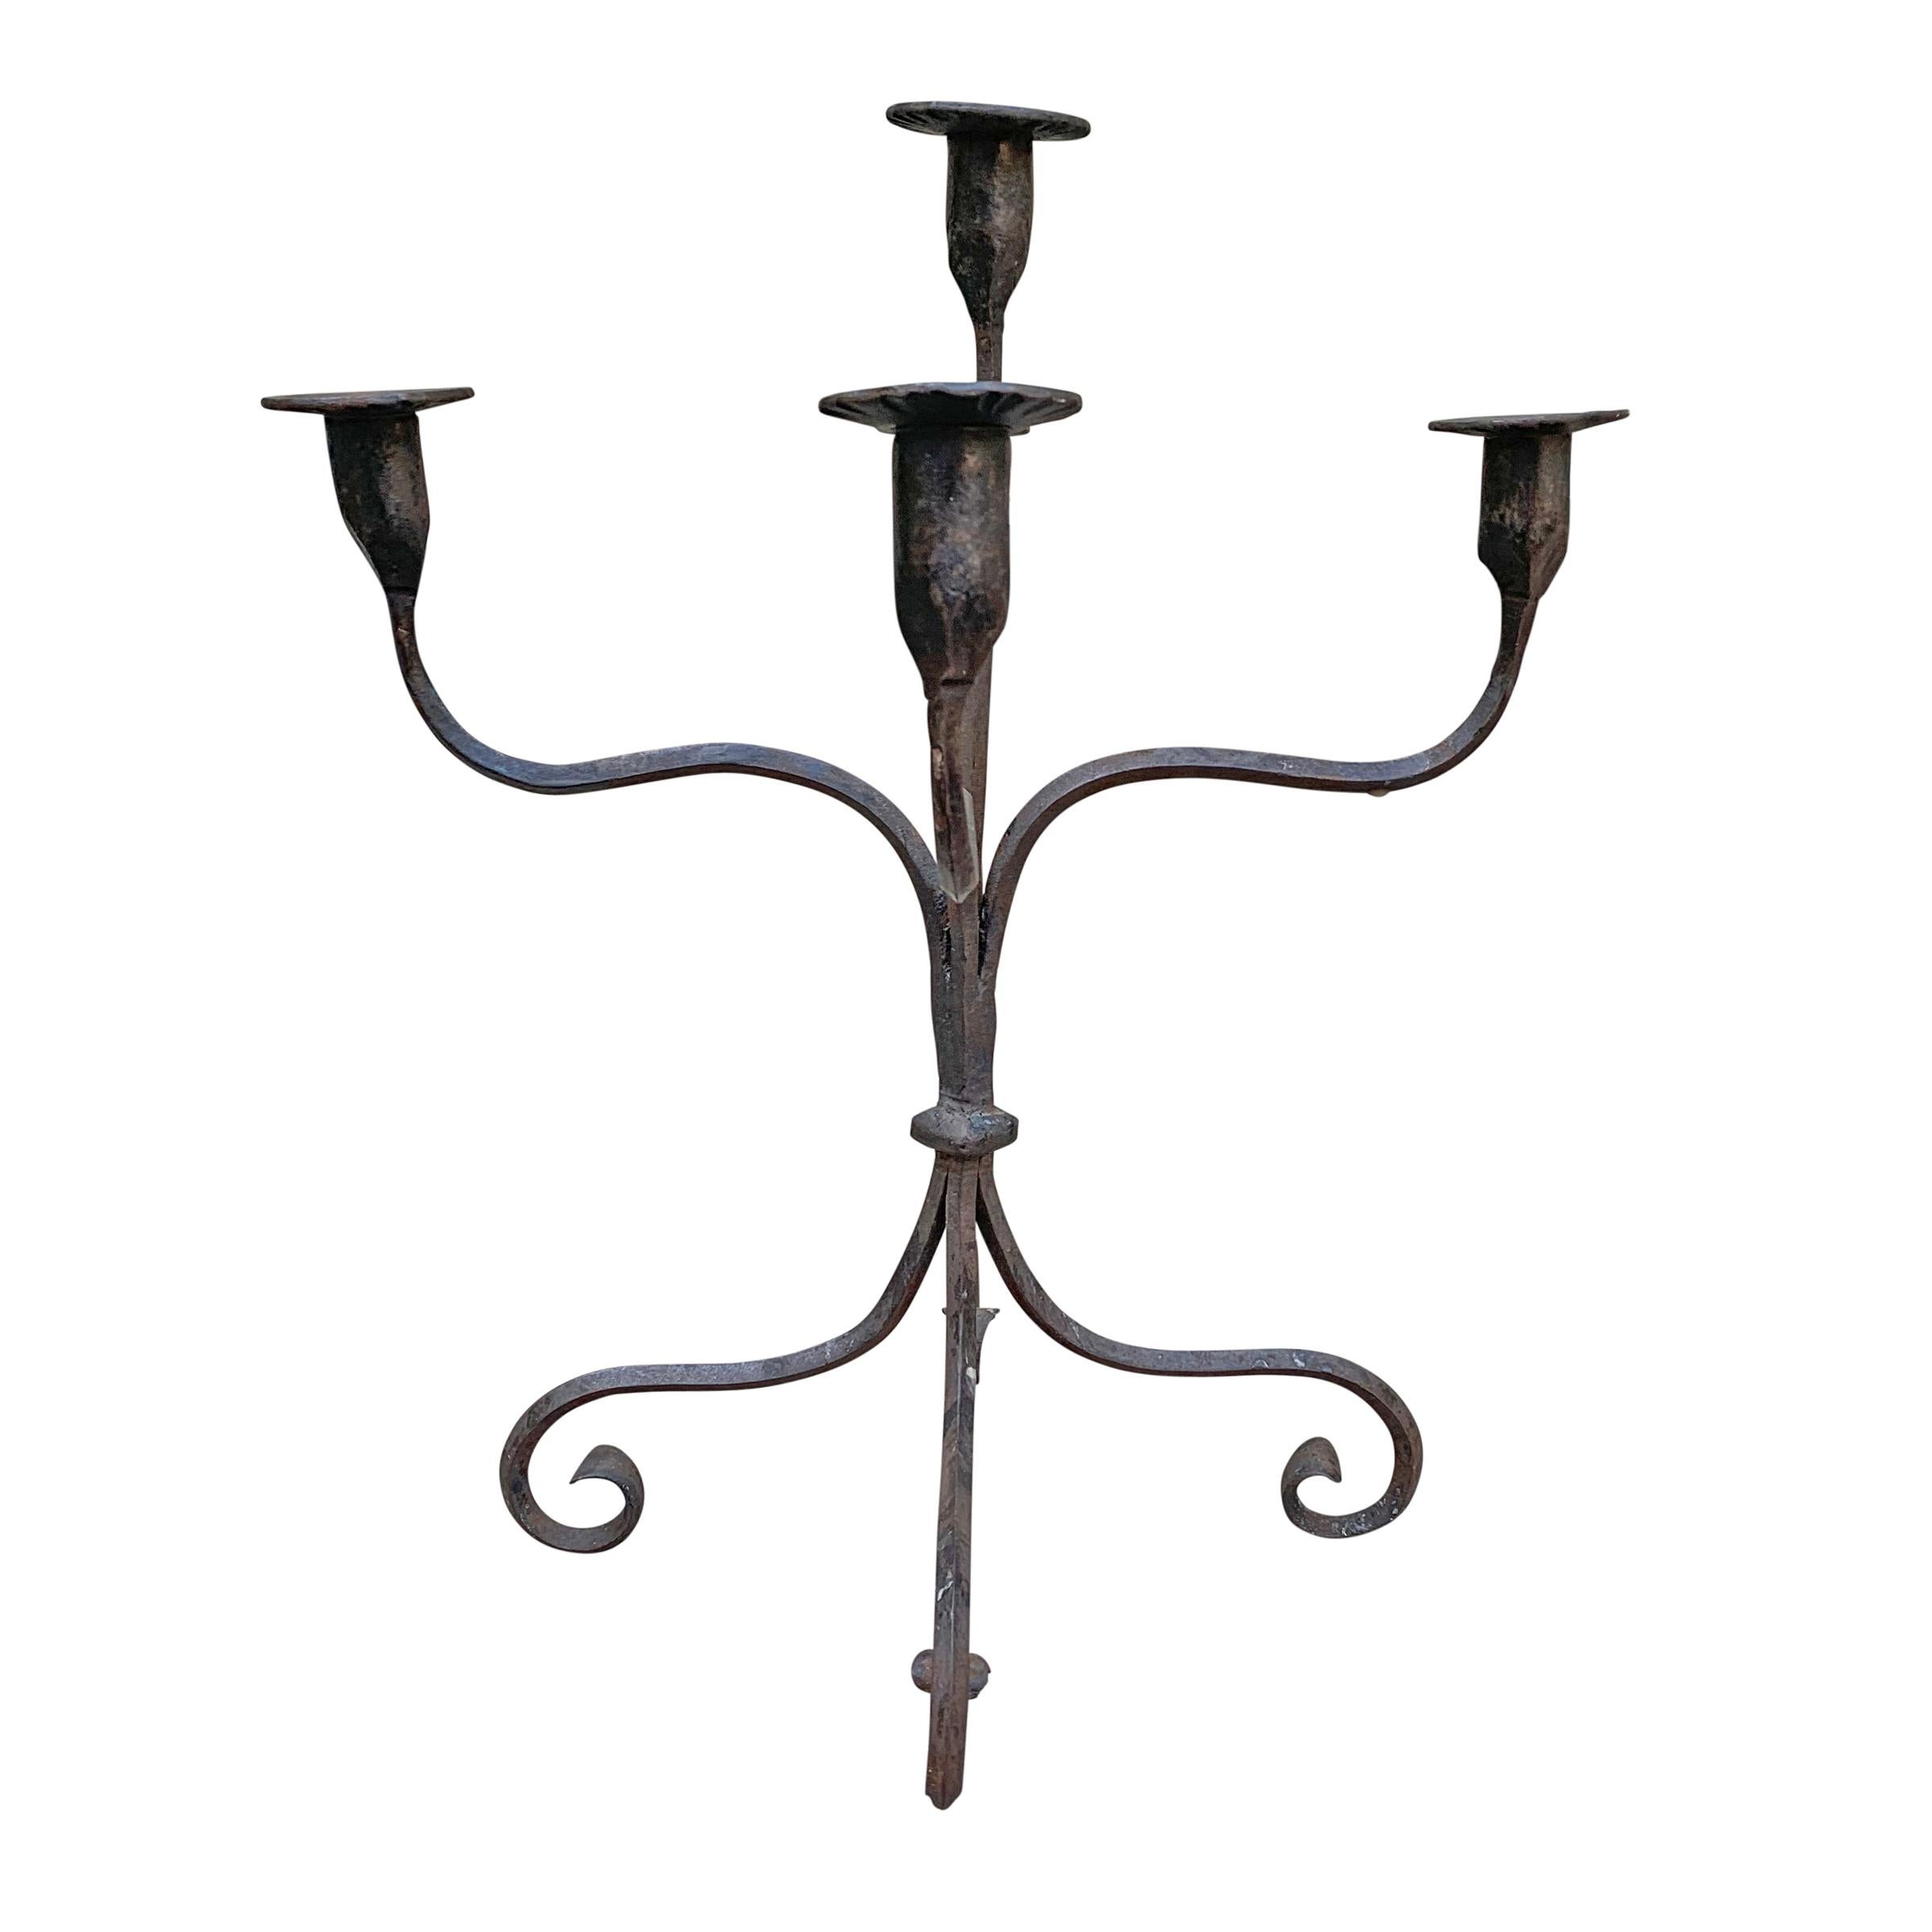 An early 20th century American hand-wrought iron four-arm five-light candelabra with a wonderfully sculptural form and long legs ending in scrolled feet.